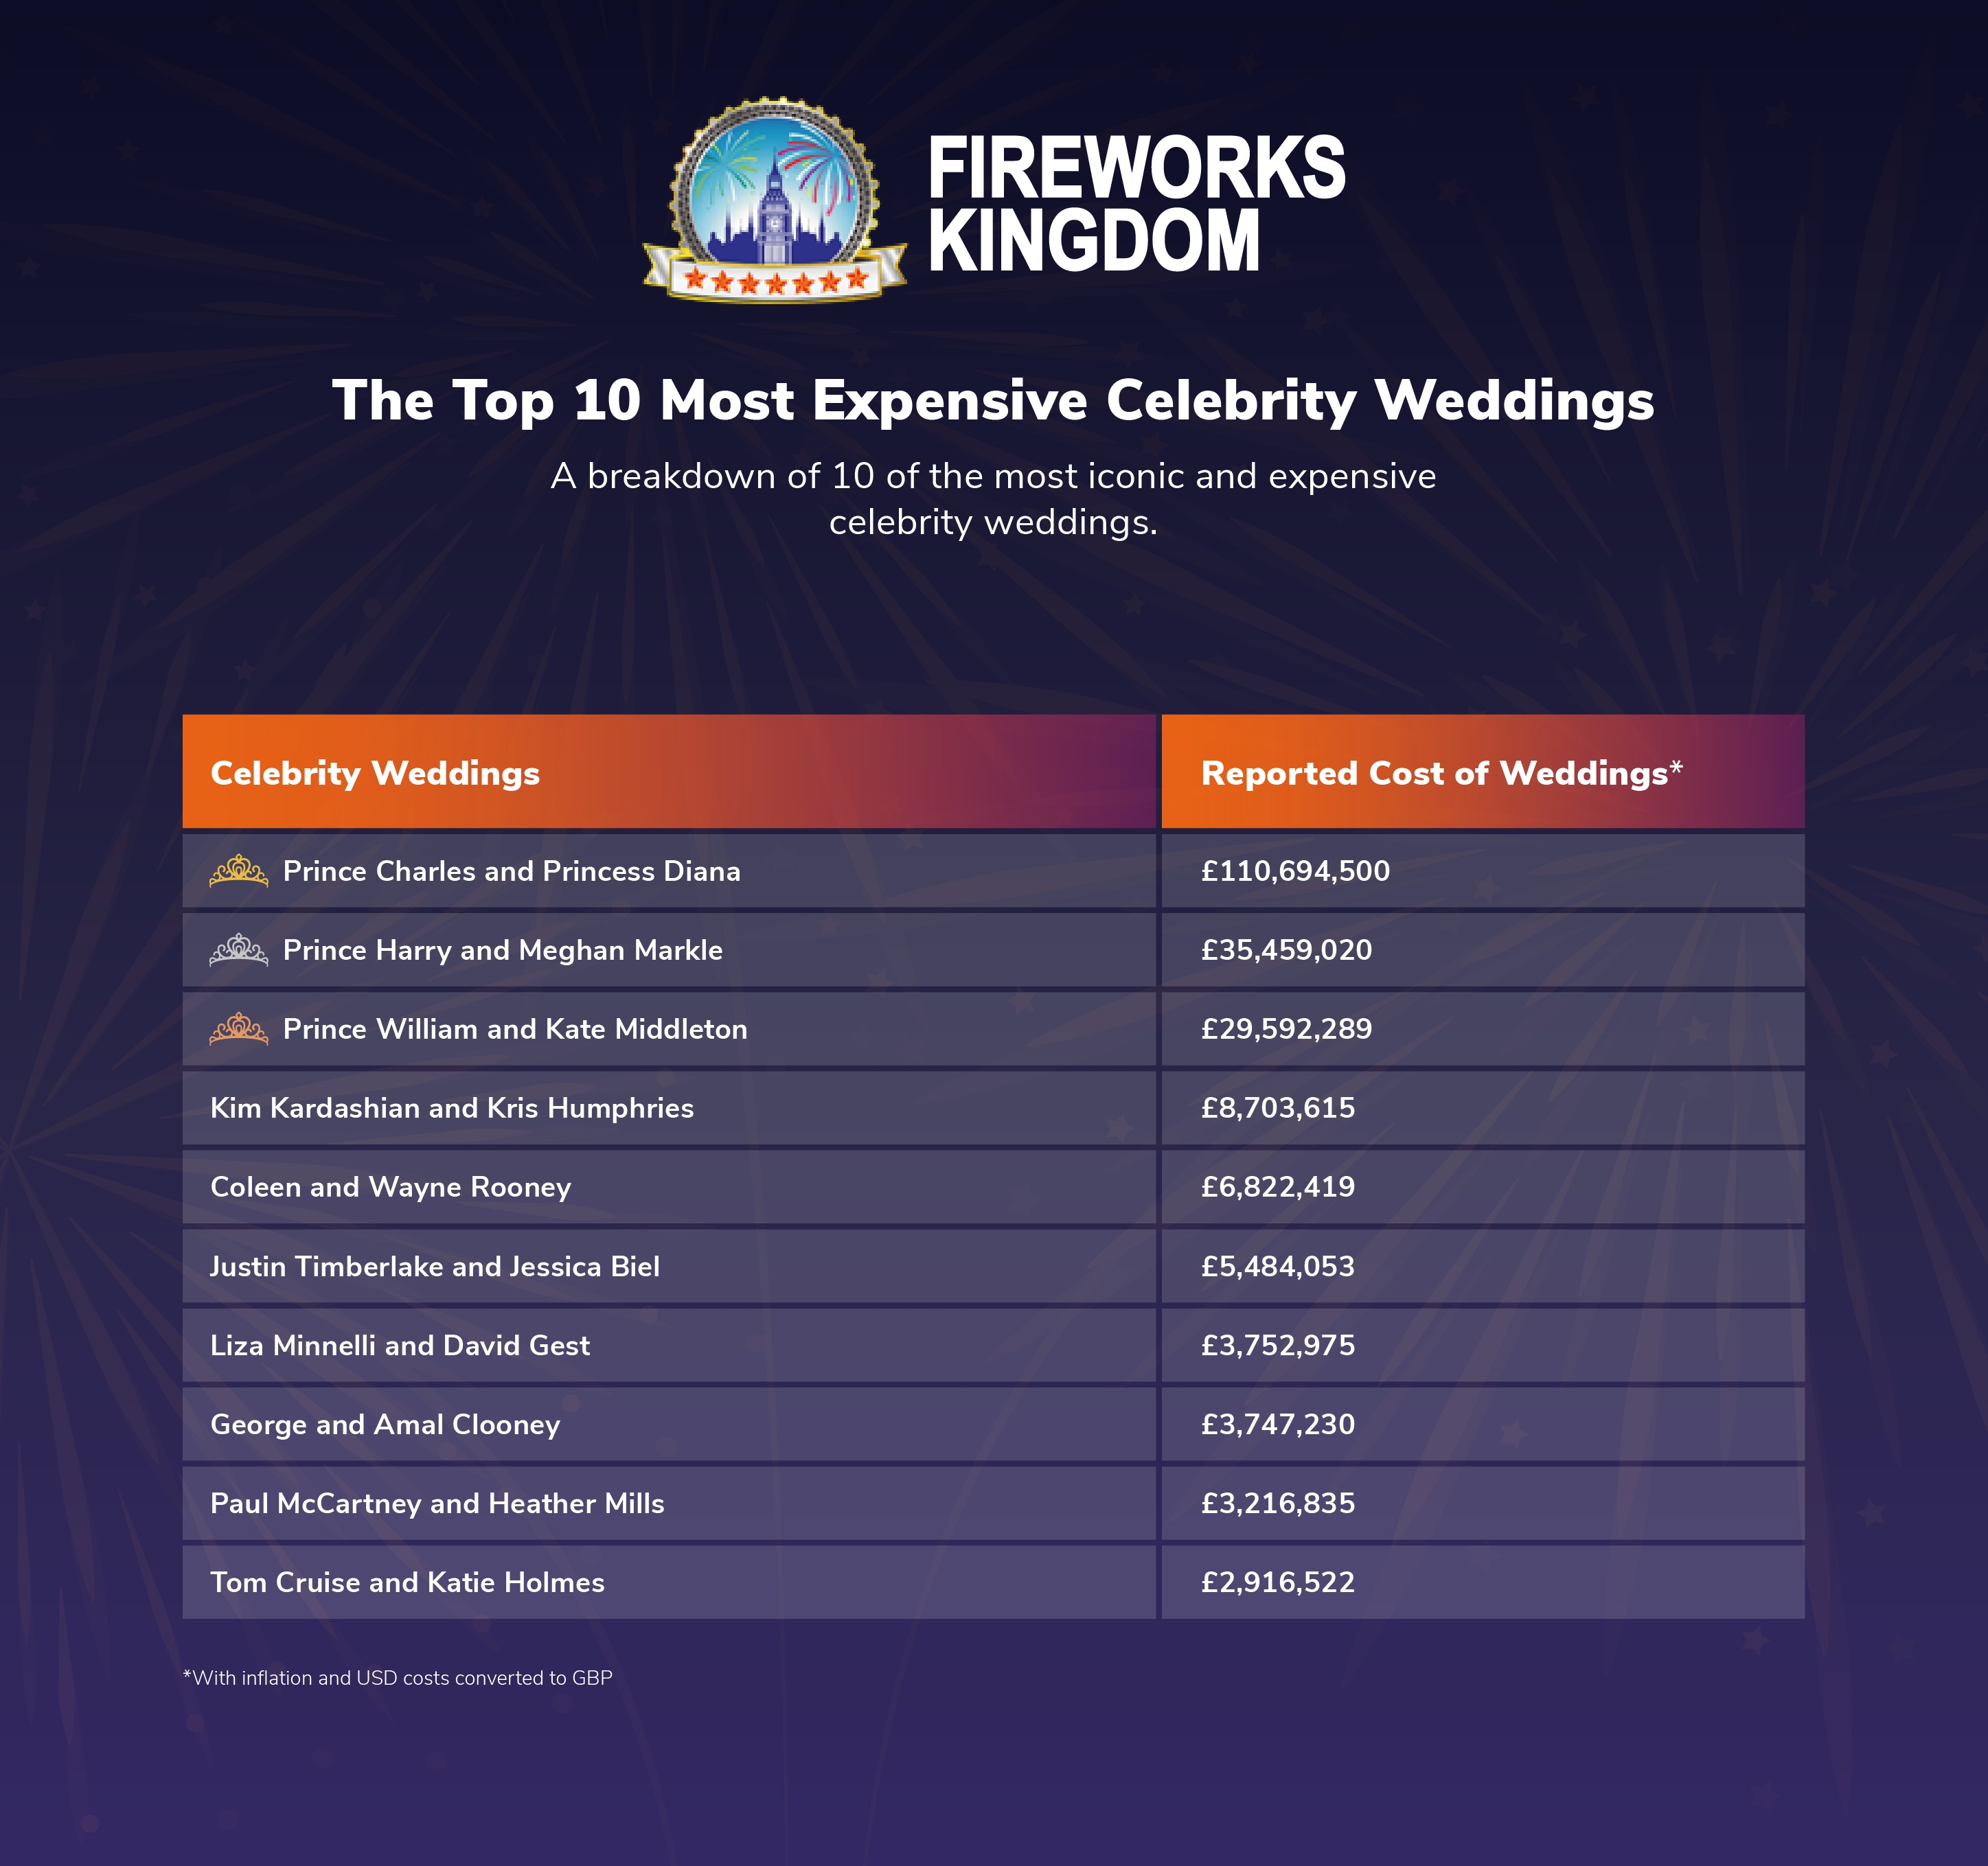 A breakdown of the top 10 most expensive celebrity weddings, with inflation and converted to GBP.